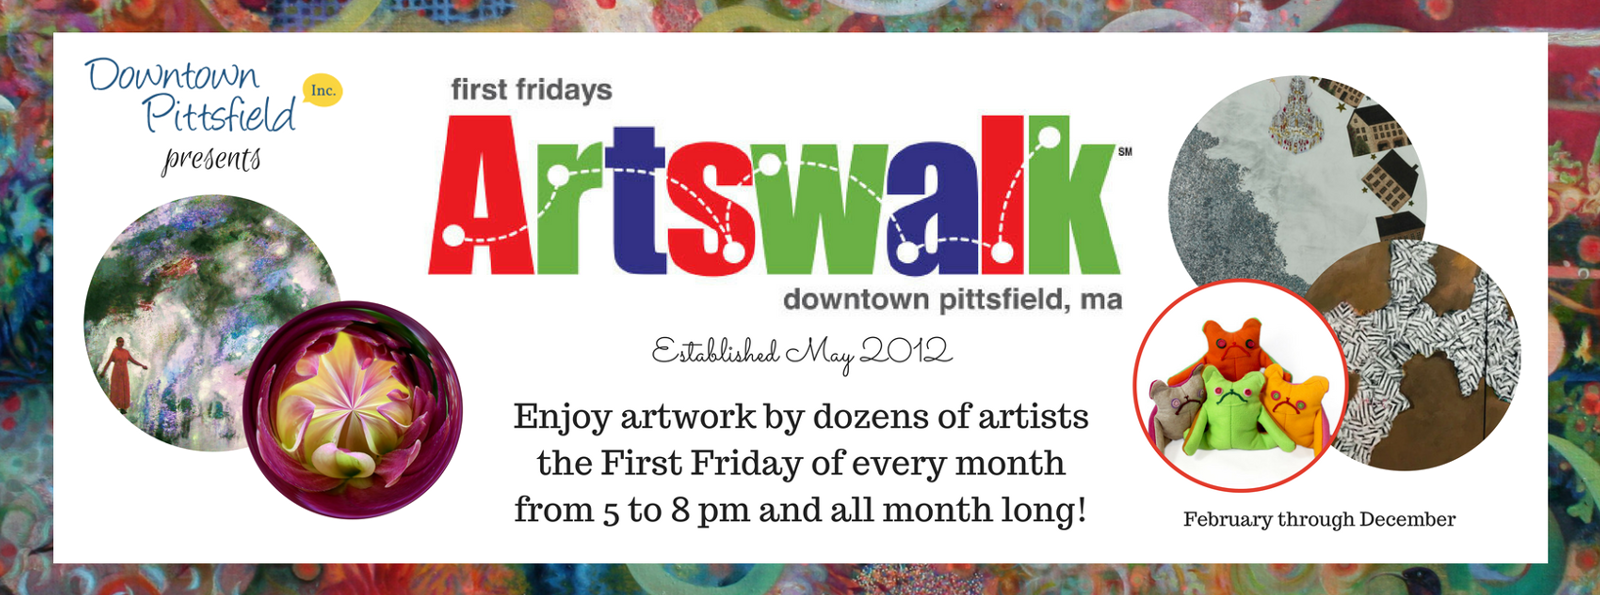 First Fridays Artswalk in Downtown Pittsfield, MA